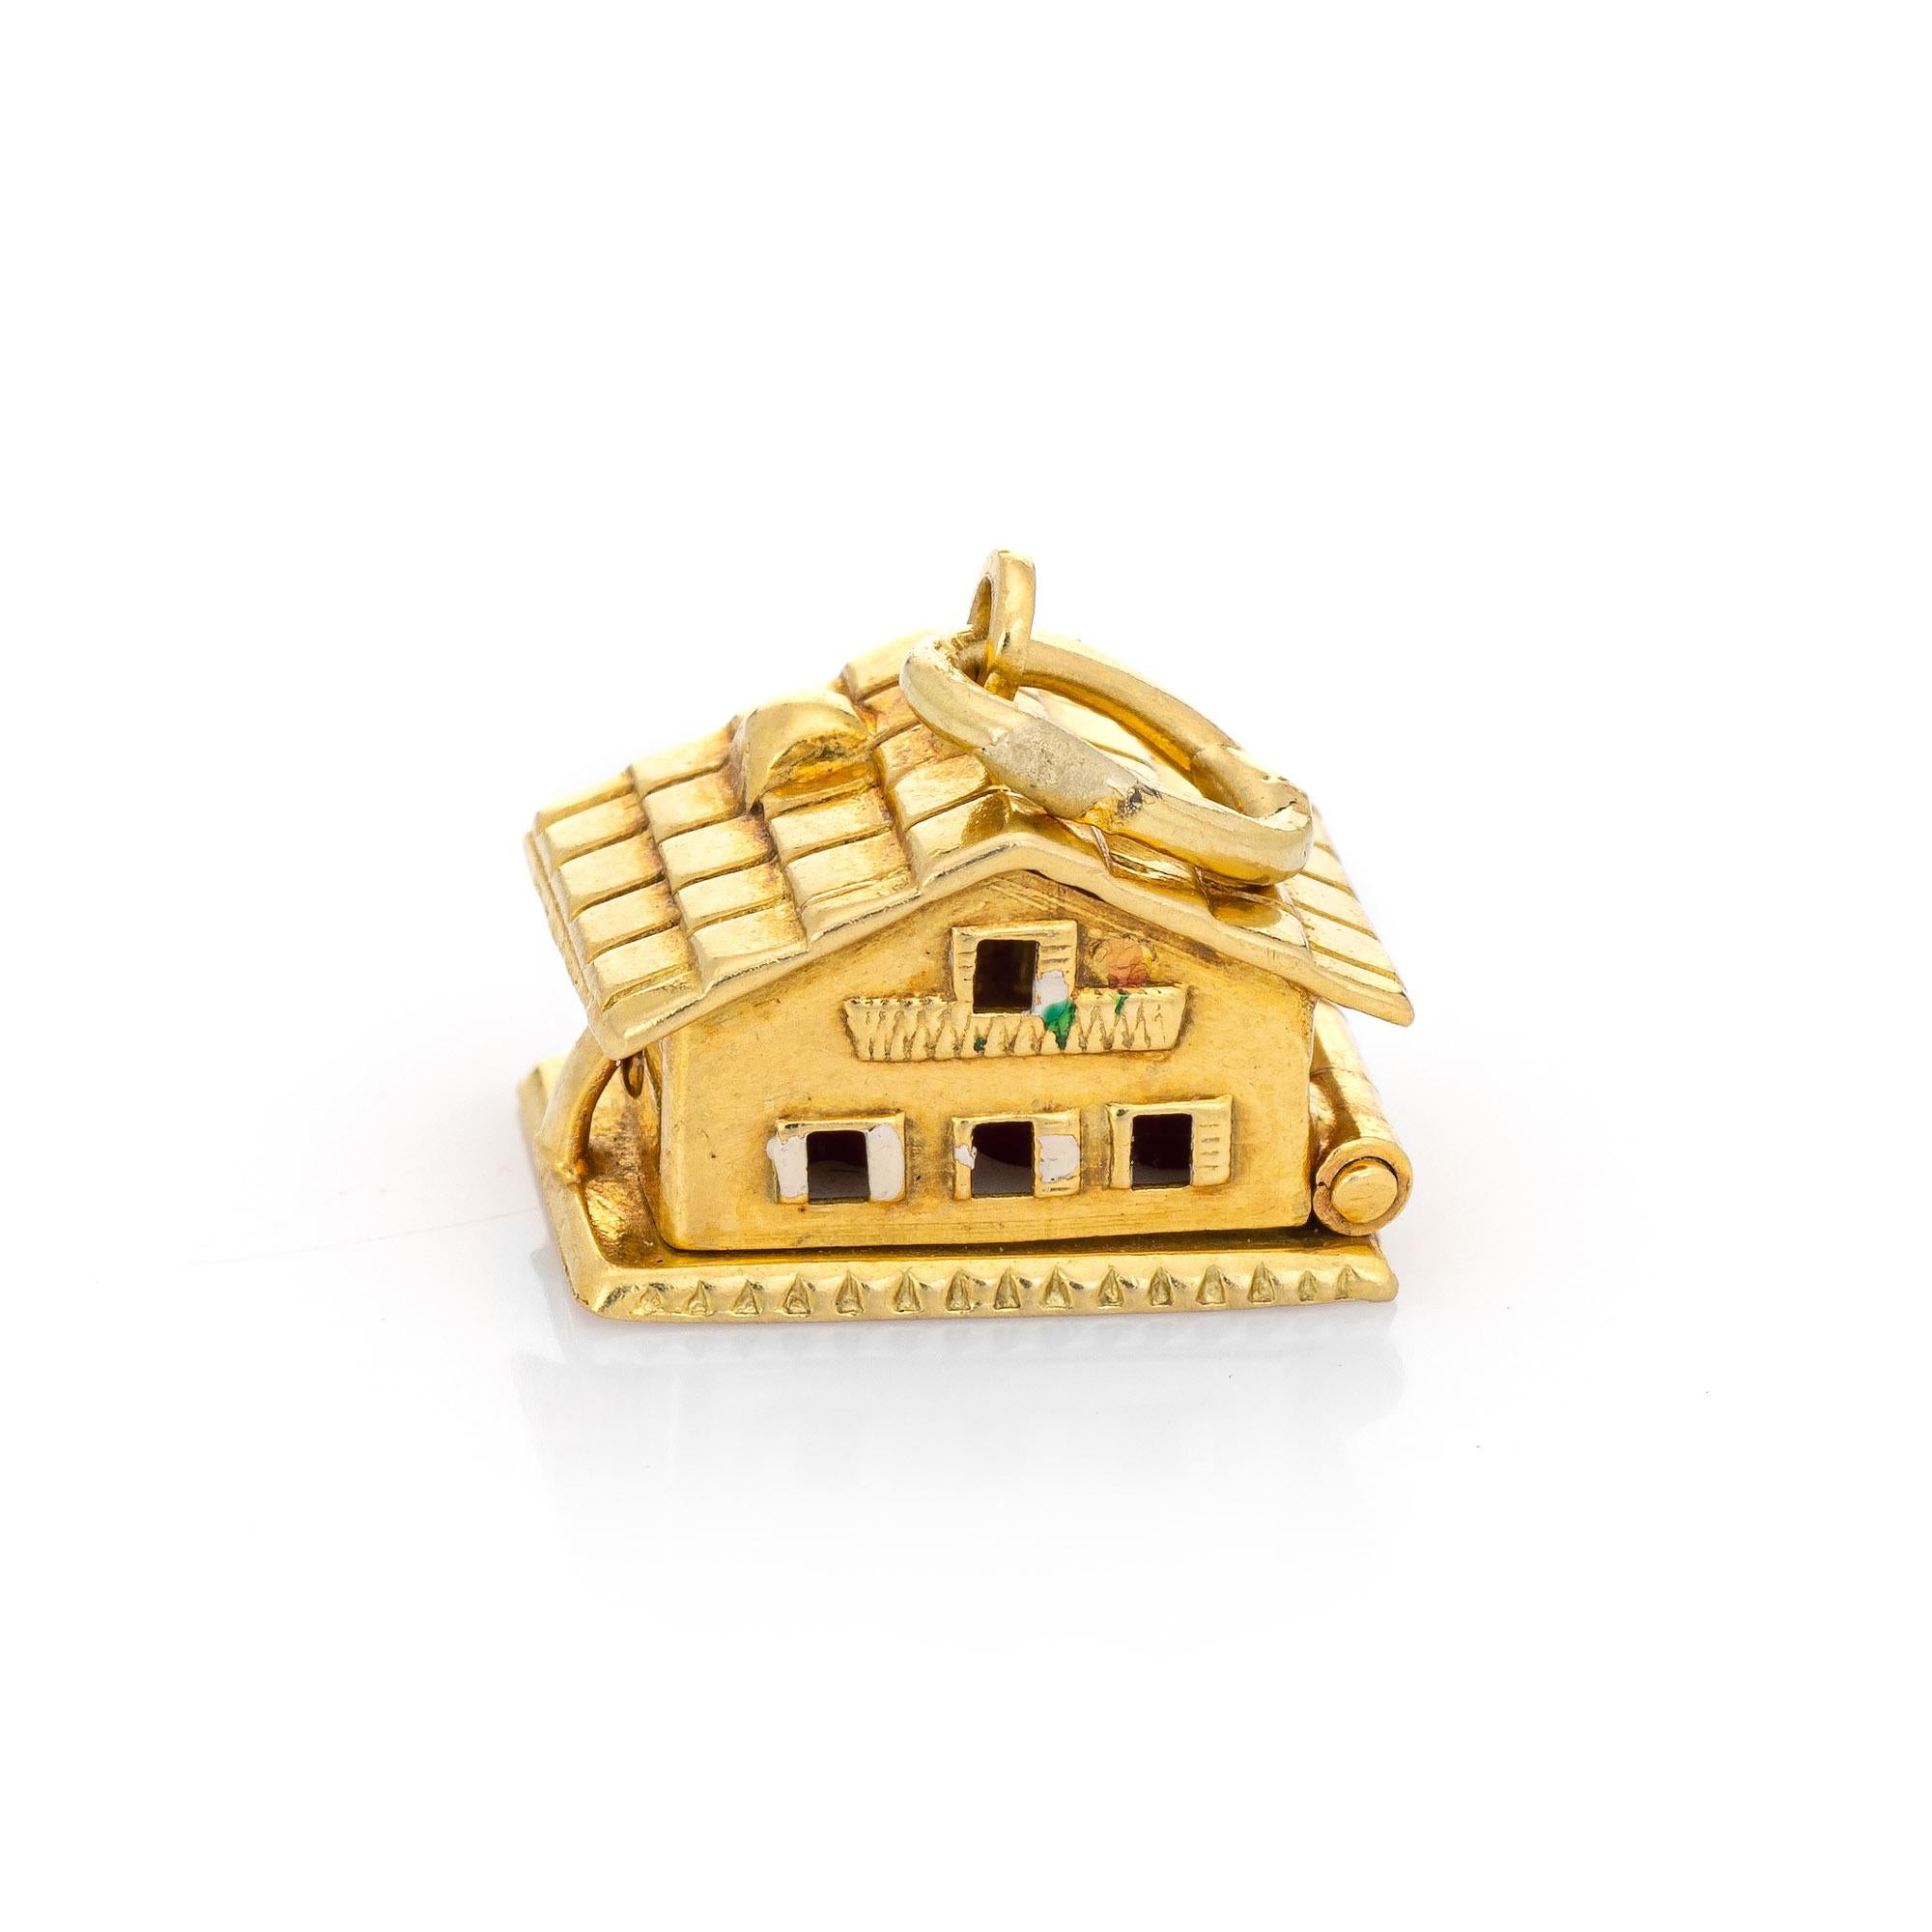 Finely detailed vintage Swiss Chalet charm crafted in 18k yellow gold.  

The unique charm is beautifully detailed with a tiled roof and windows, and opens to reveal two enameled hearts. How sweet! The bale measures 3mm and can accommodate a thin to